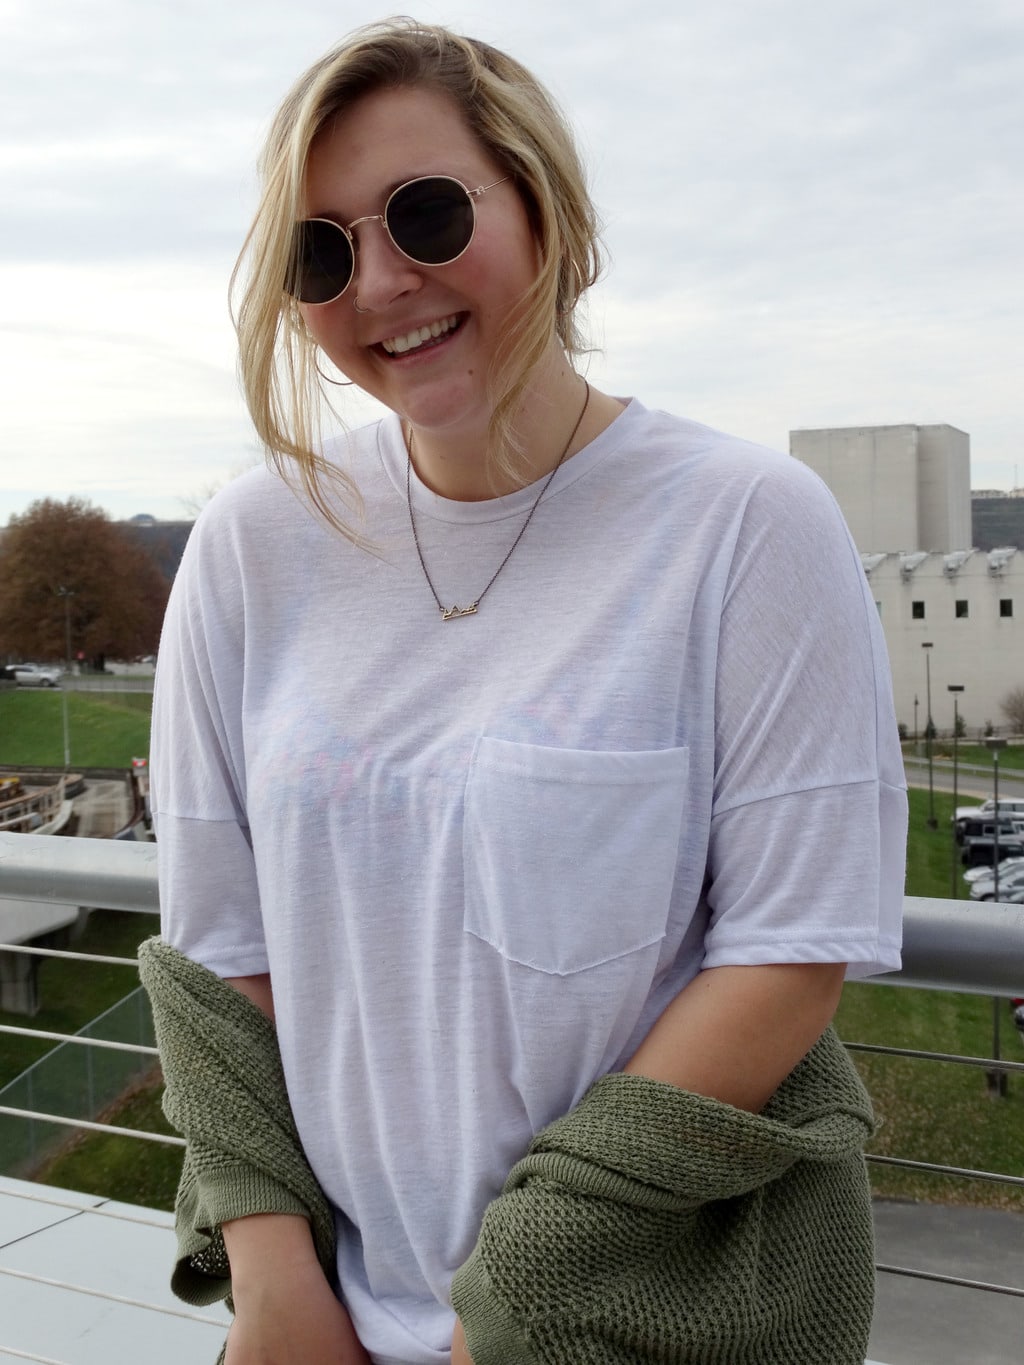 Mel wears a loose-fitted white pocket t-shirt with a simple gold necklace and round sunglasses with gold frames.